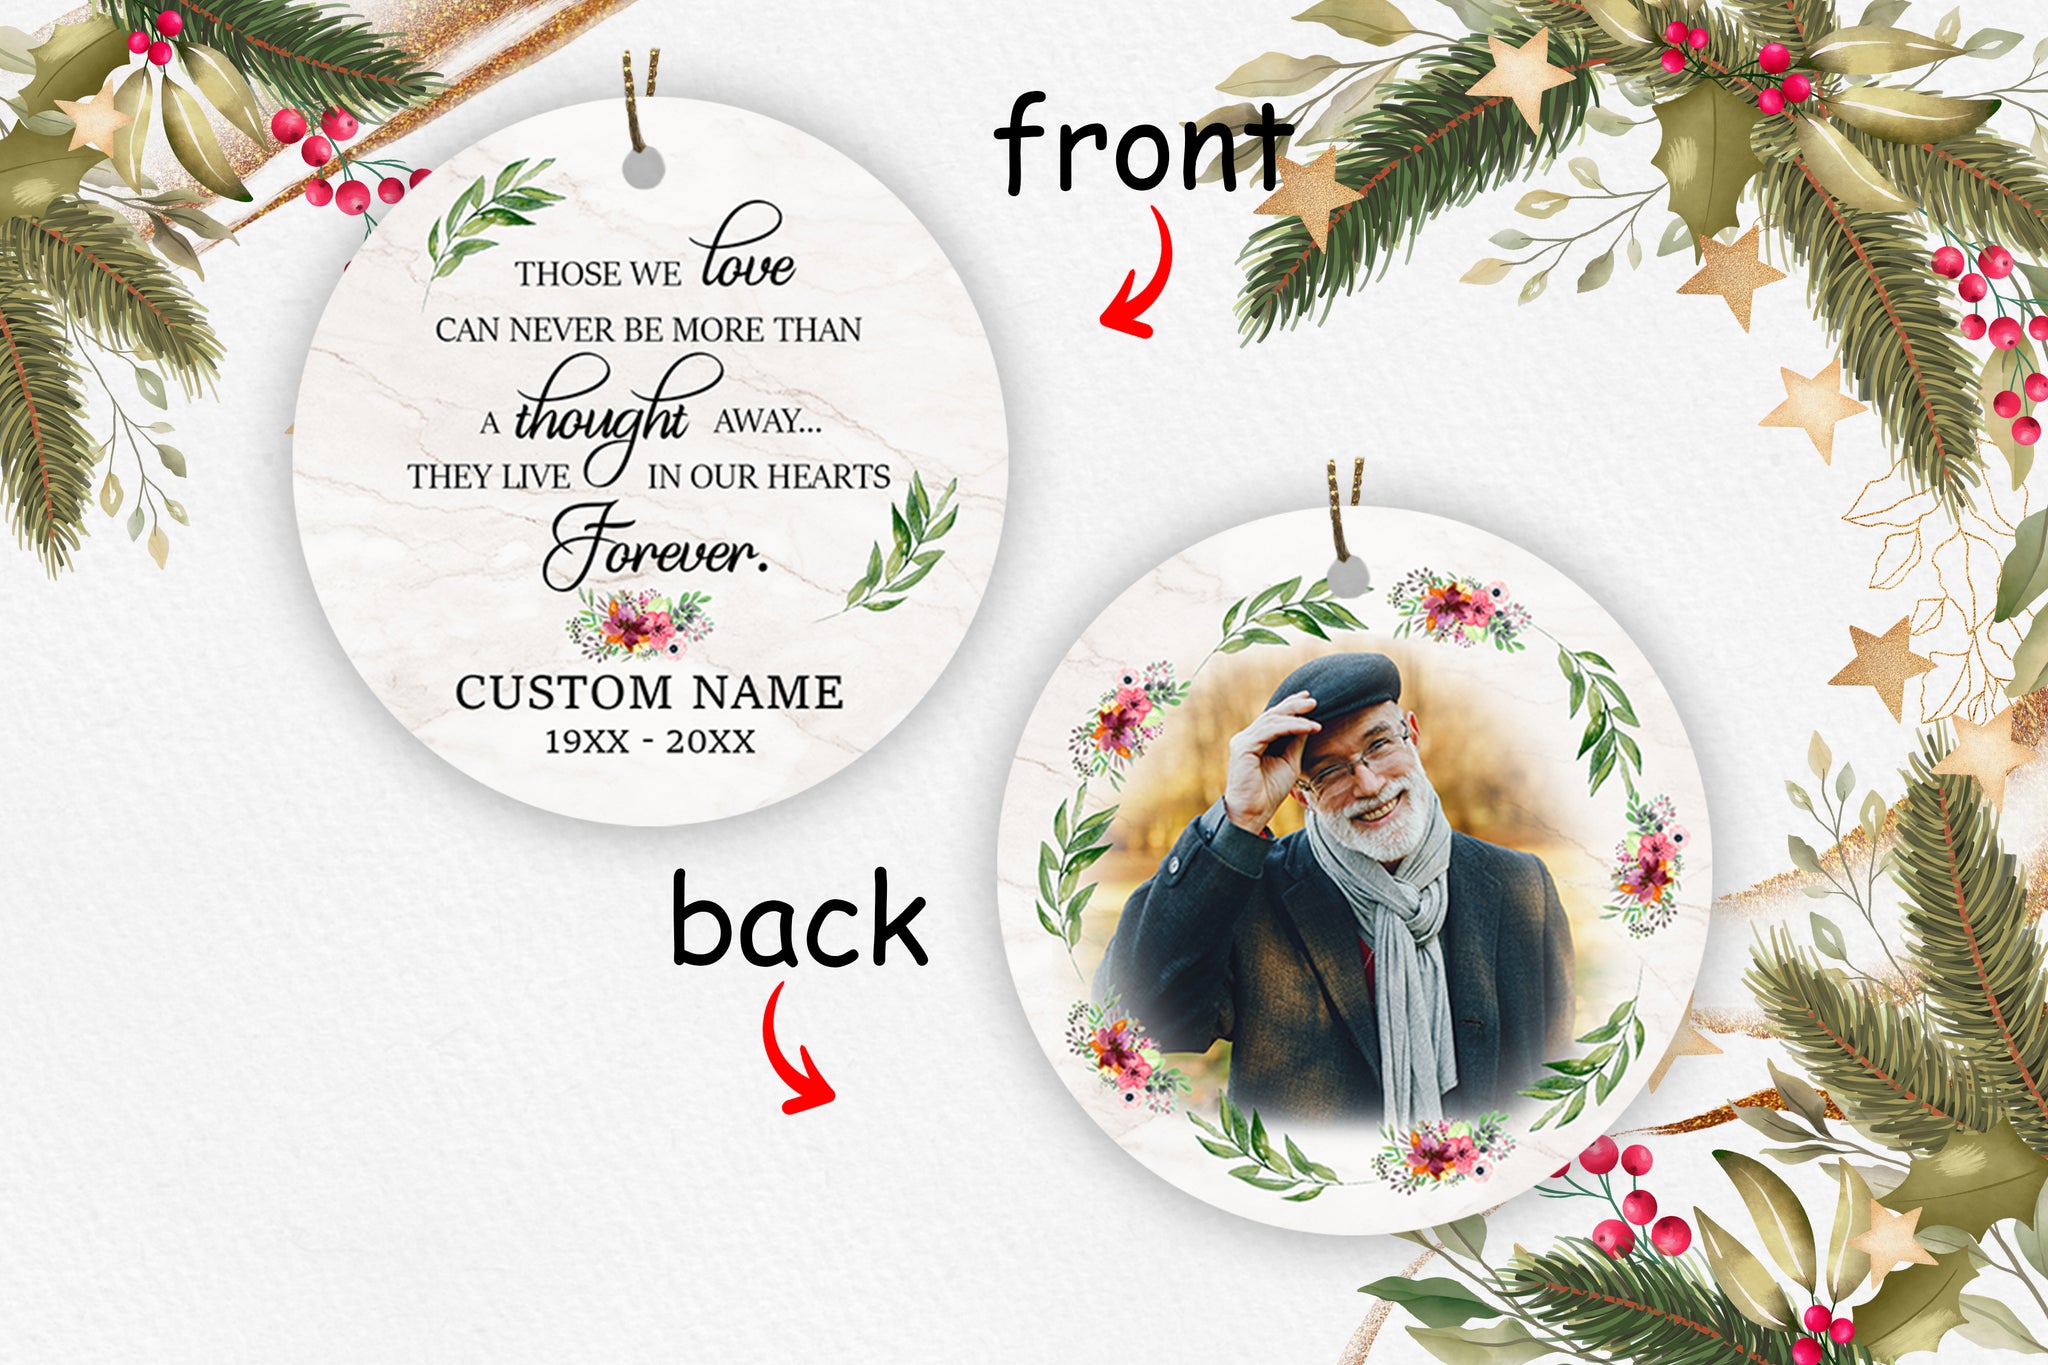 Memorial Circle Ornament - They Live In Our Hearts Forever Personalized 2 Sided Ornament Christmas Remembrance Ornament Memorial Keepsake Gift for Loss of Father Mother Loved One - JOR72